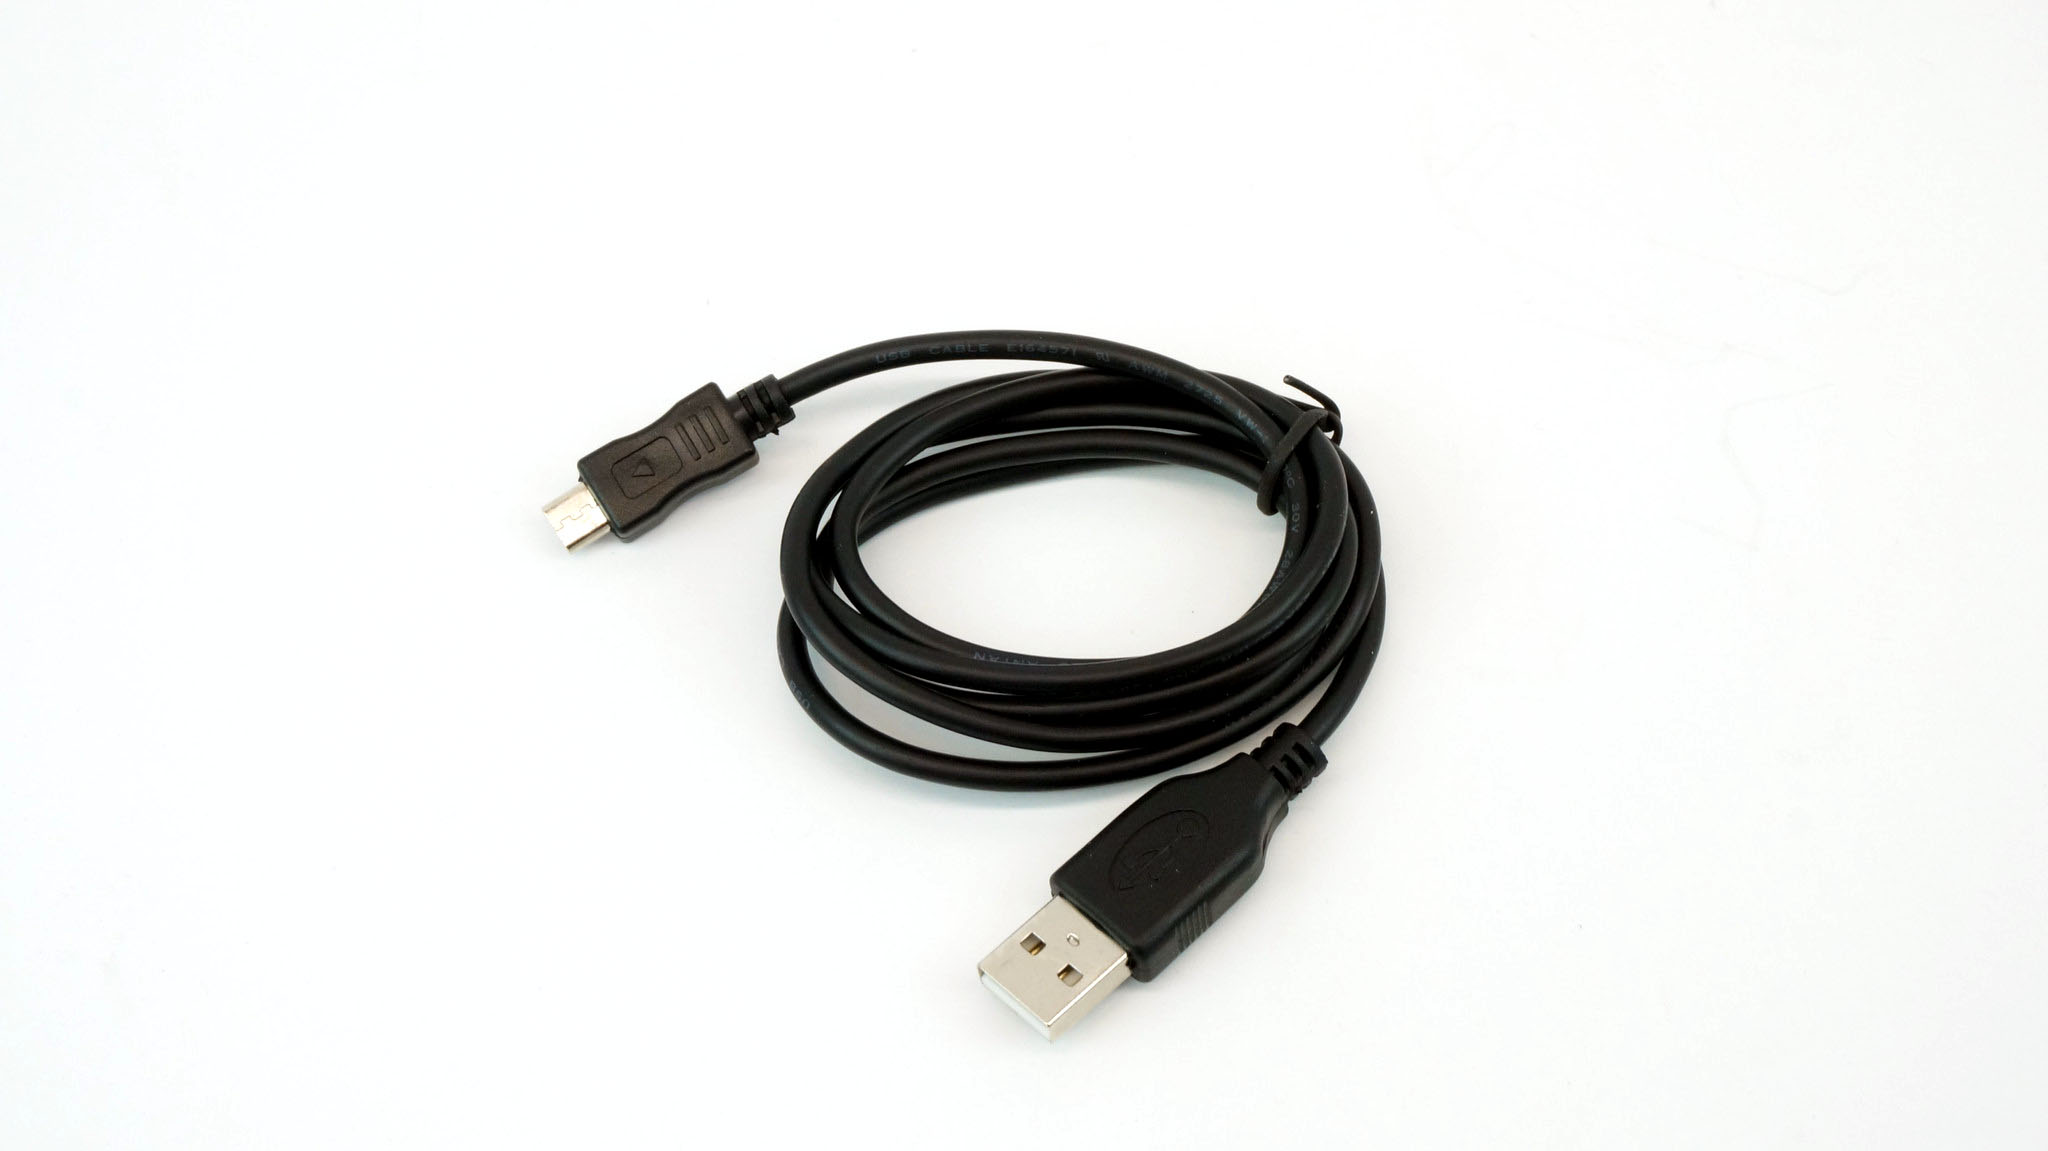 USB to Micro USB Cable